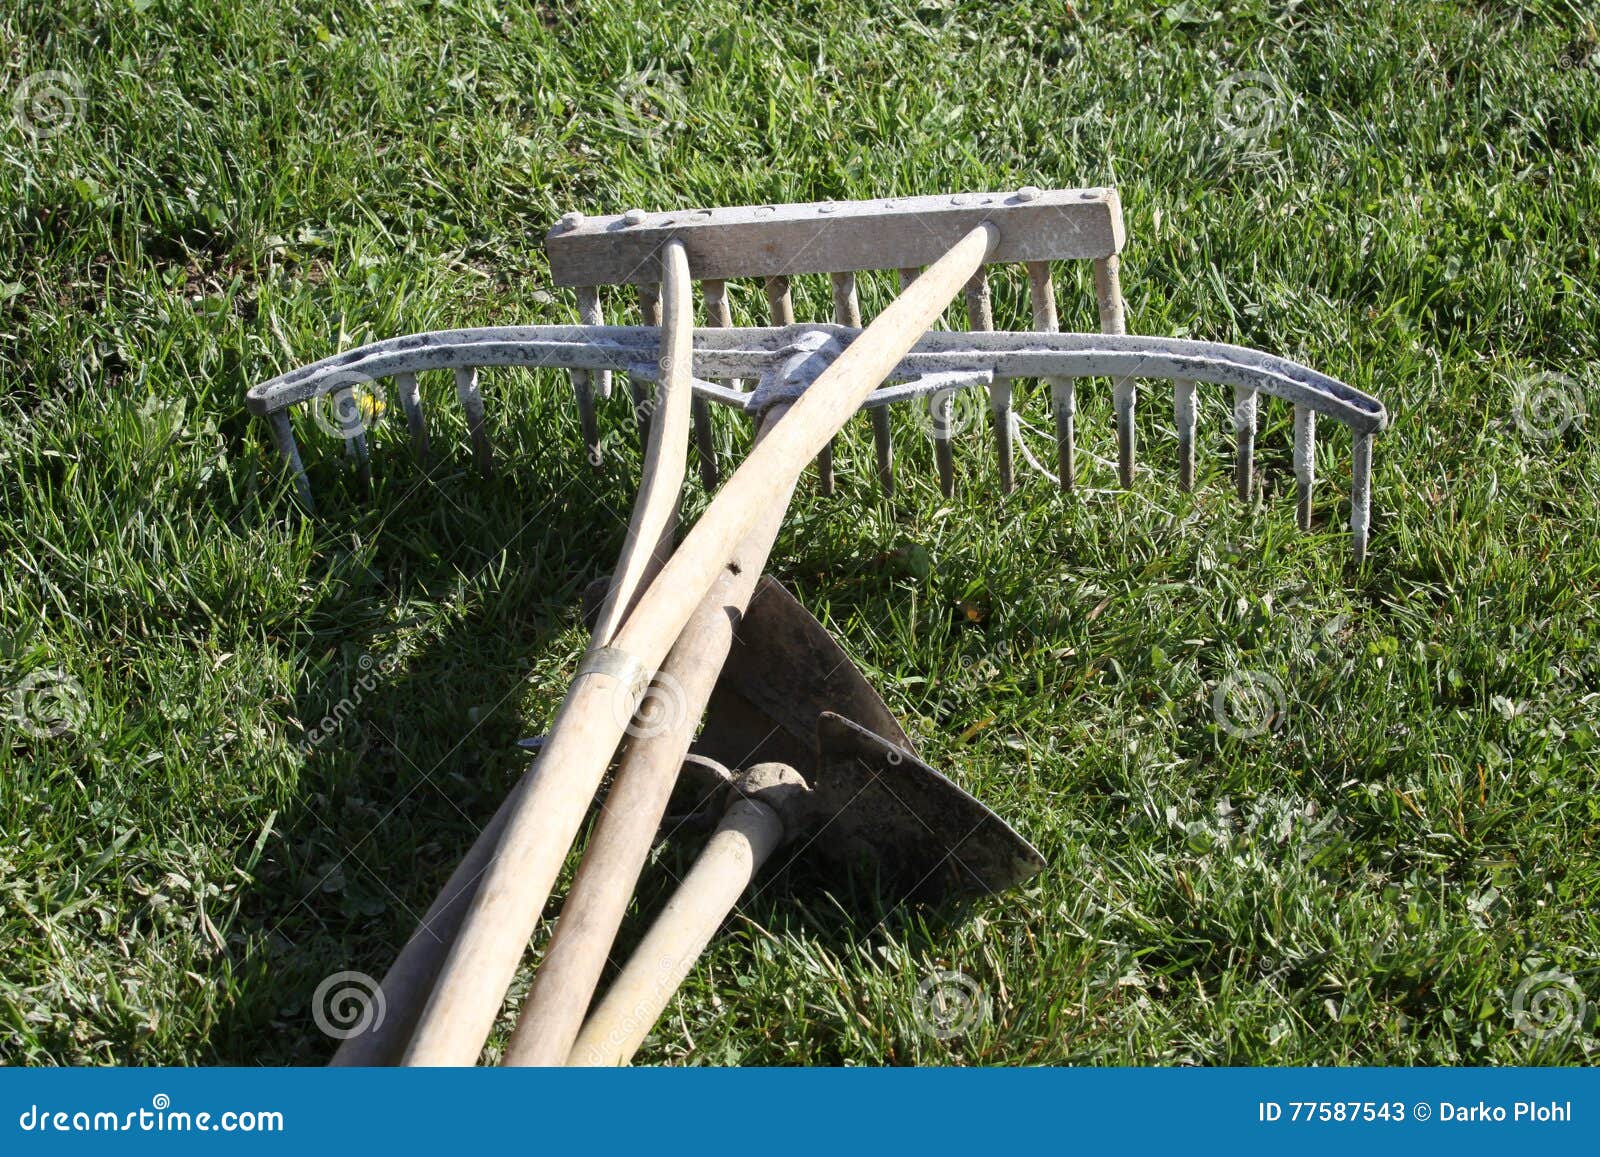 Garden tools in wood stock image. Image of wood, lawn - 77587543